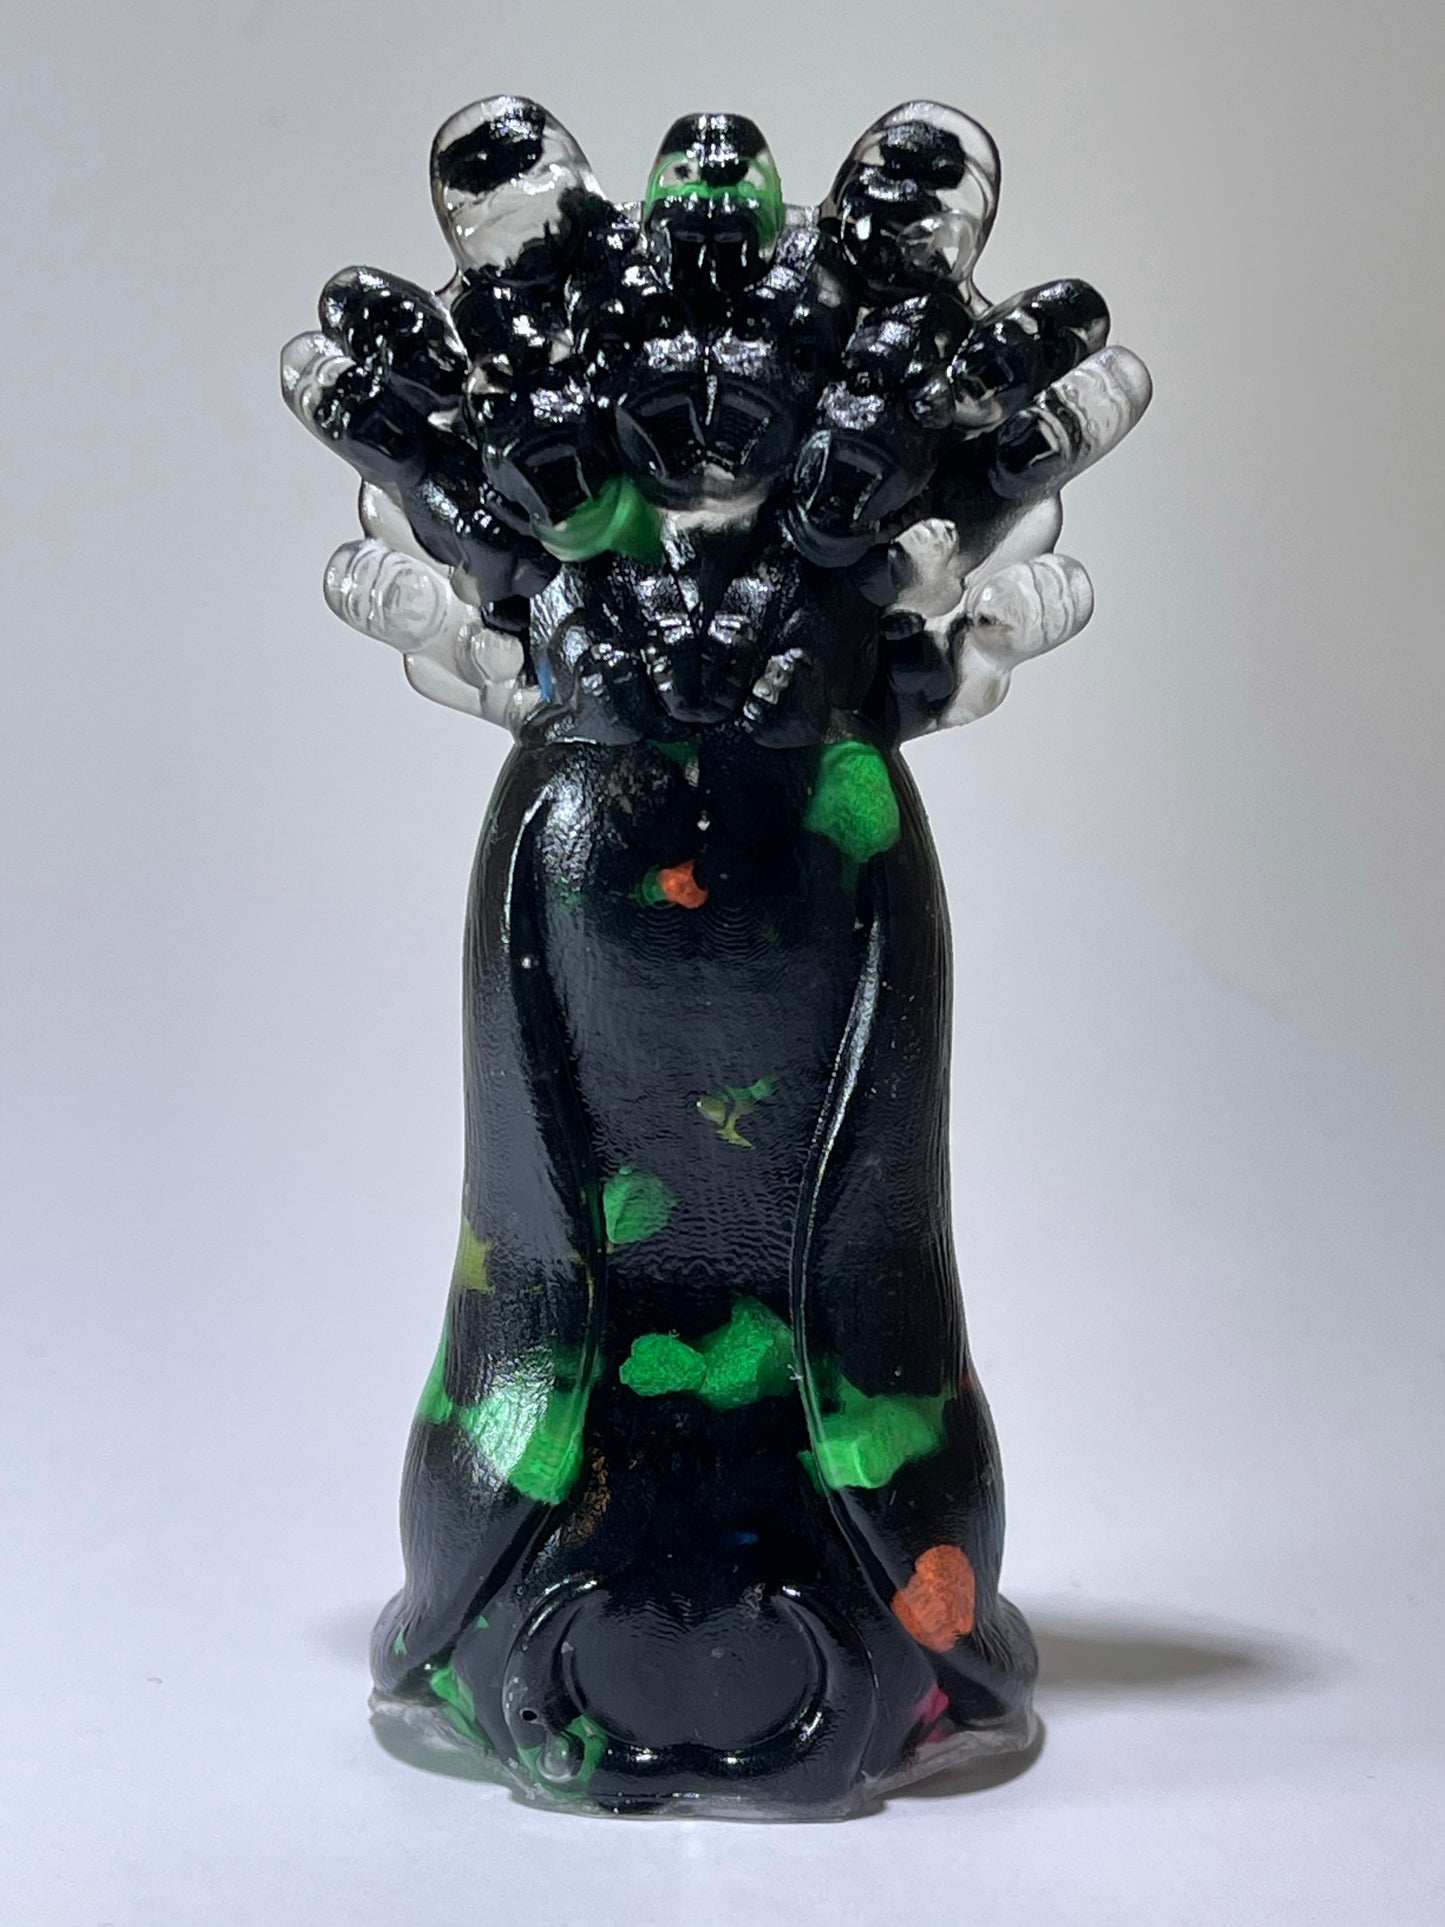 His Majesty, the King: Resin Cast Black and Neon Stones